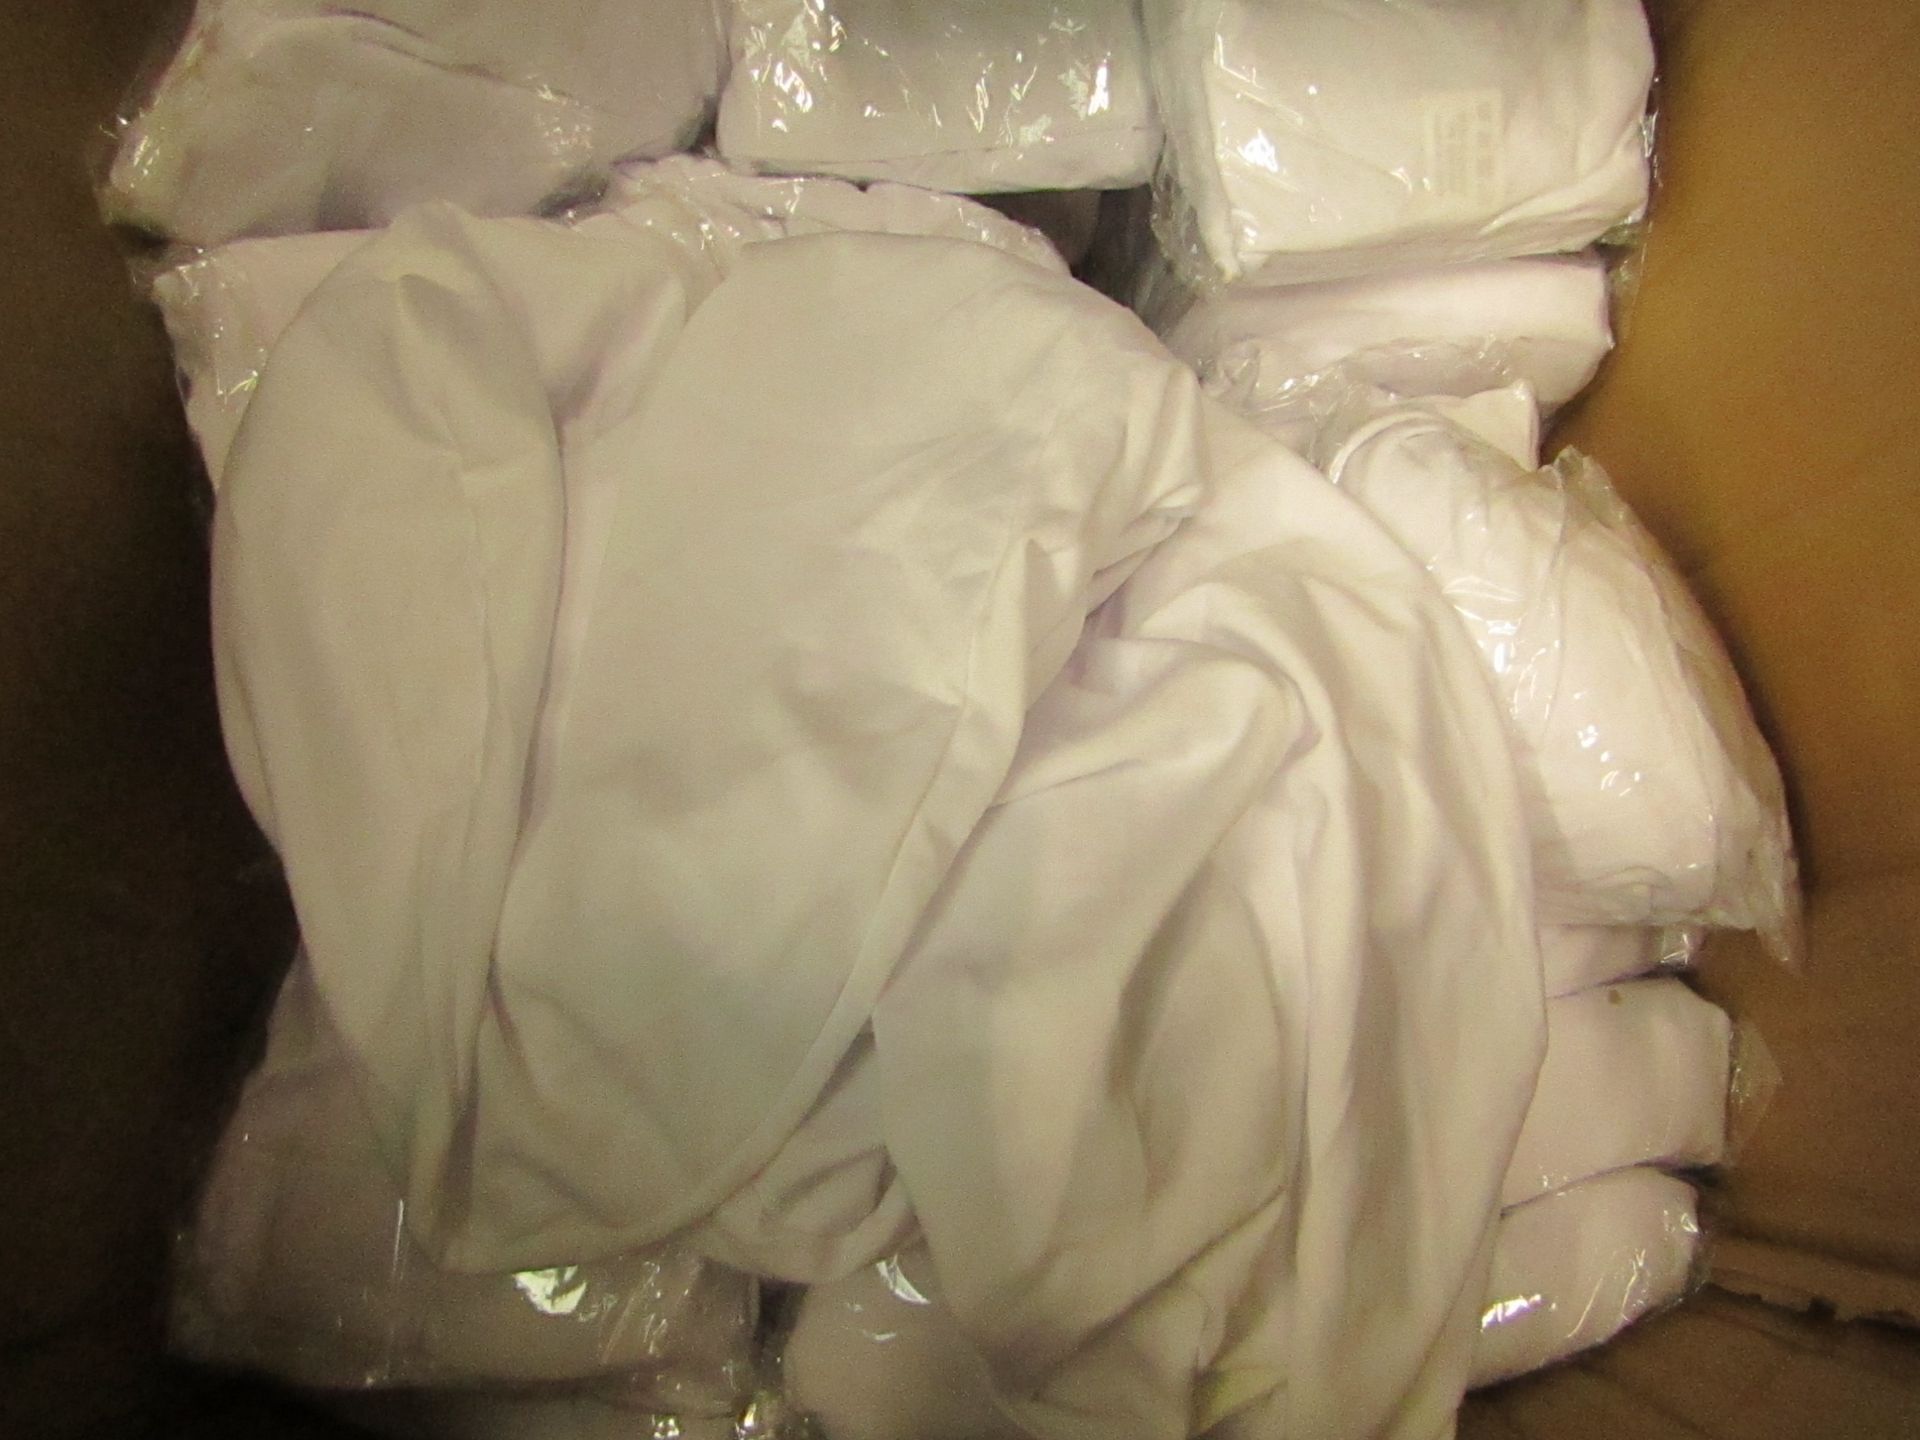 12 x White Dining Chair Covers. New & Packaged